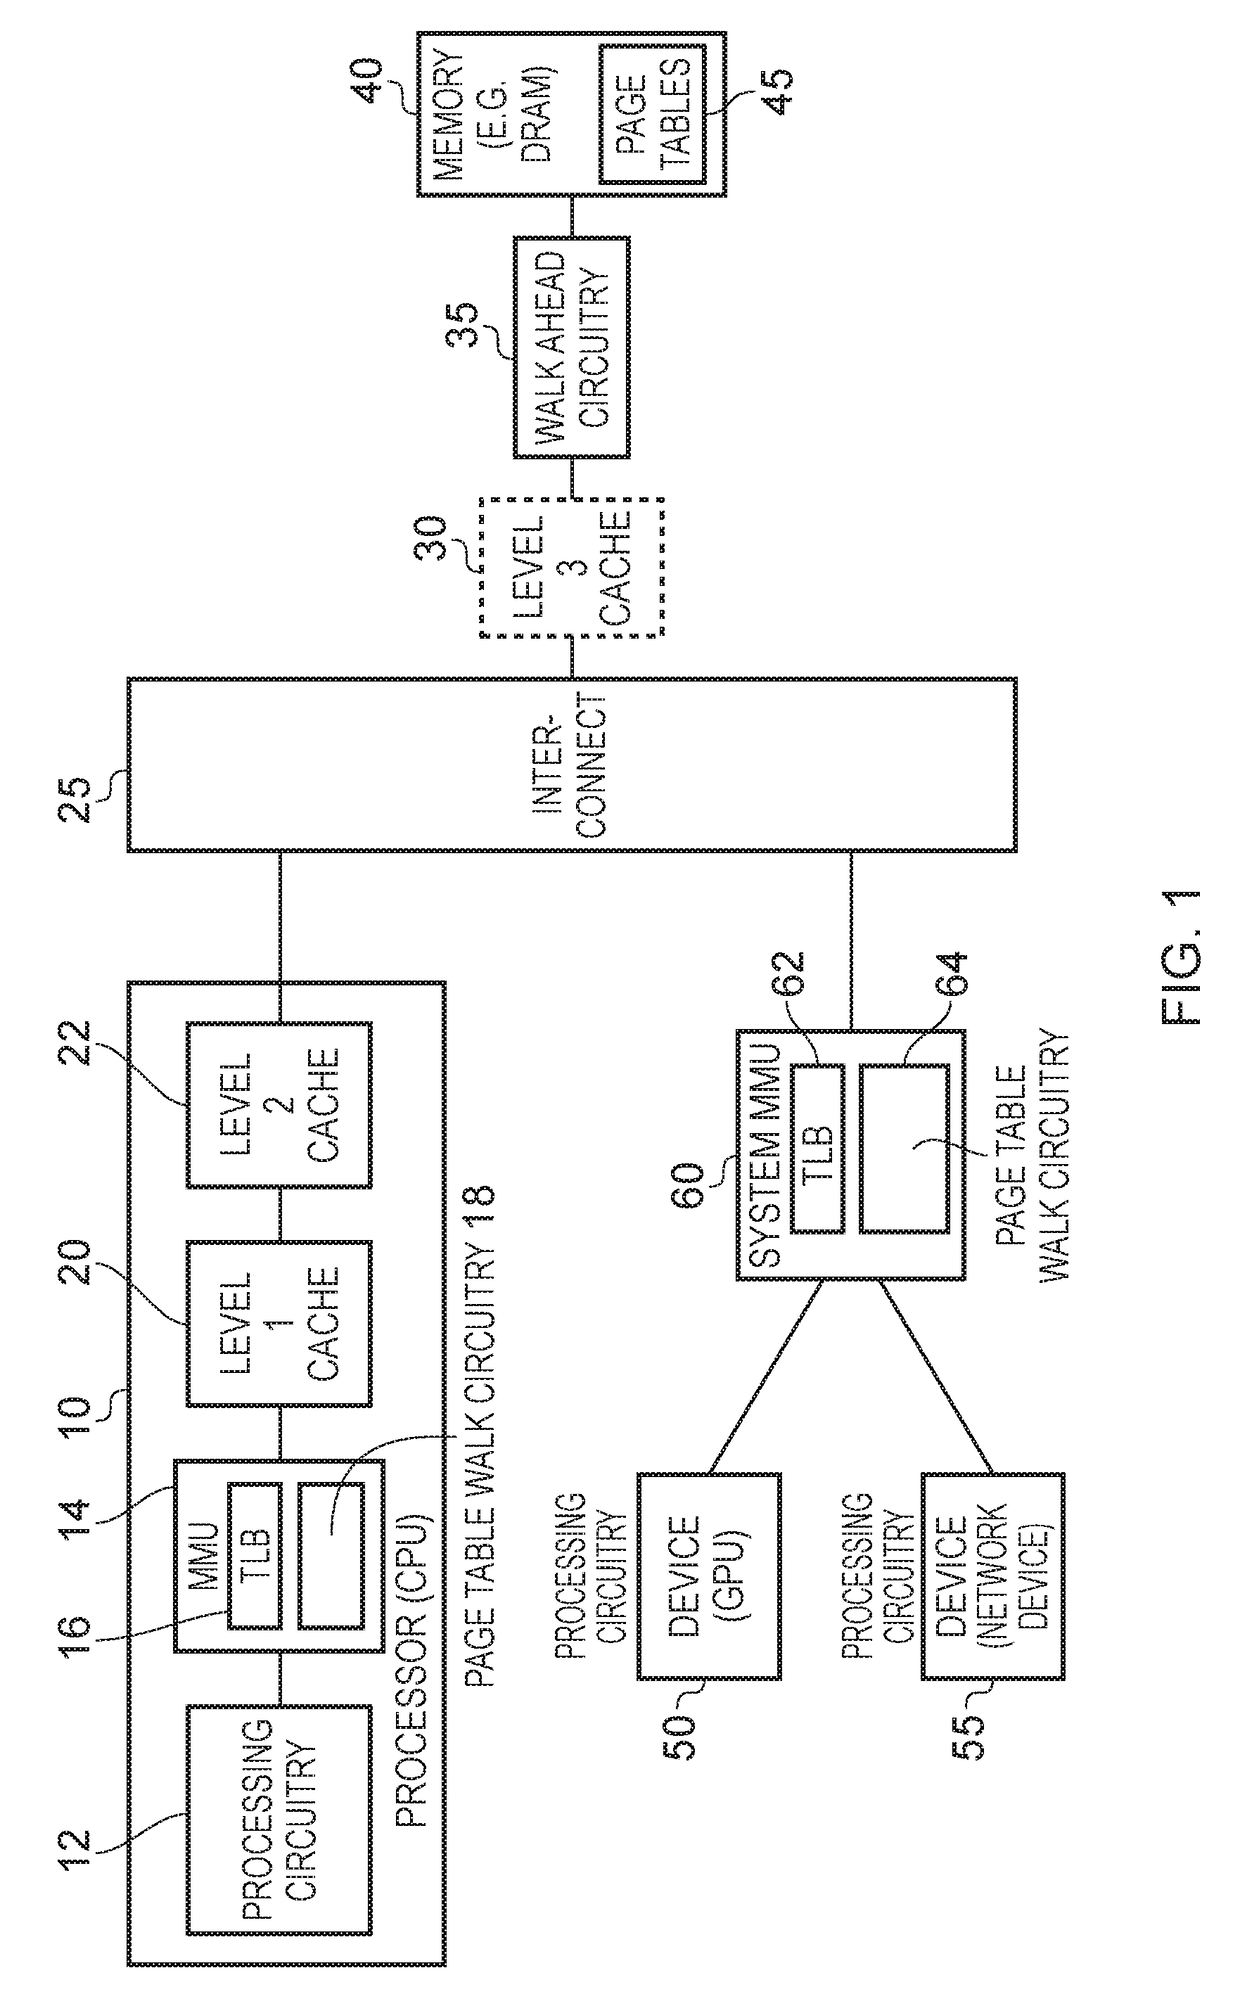 A data processing apparatus, and a method of handling address translation within a data processing apparatus